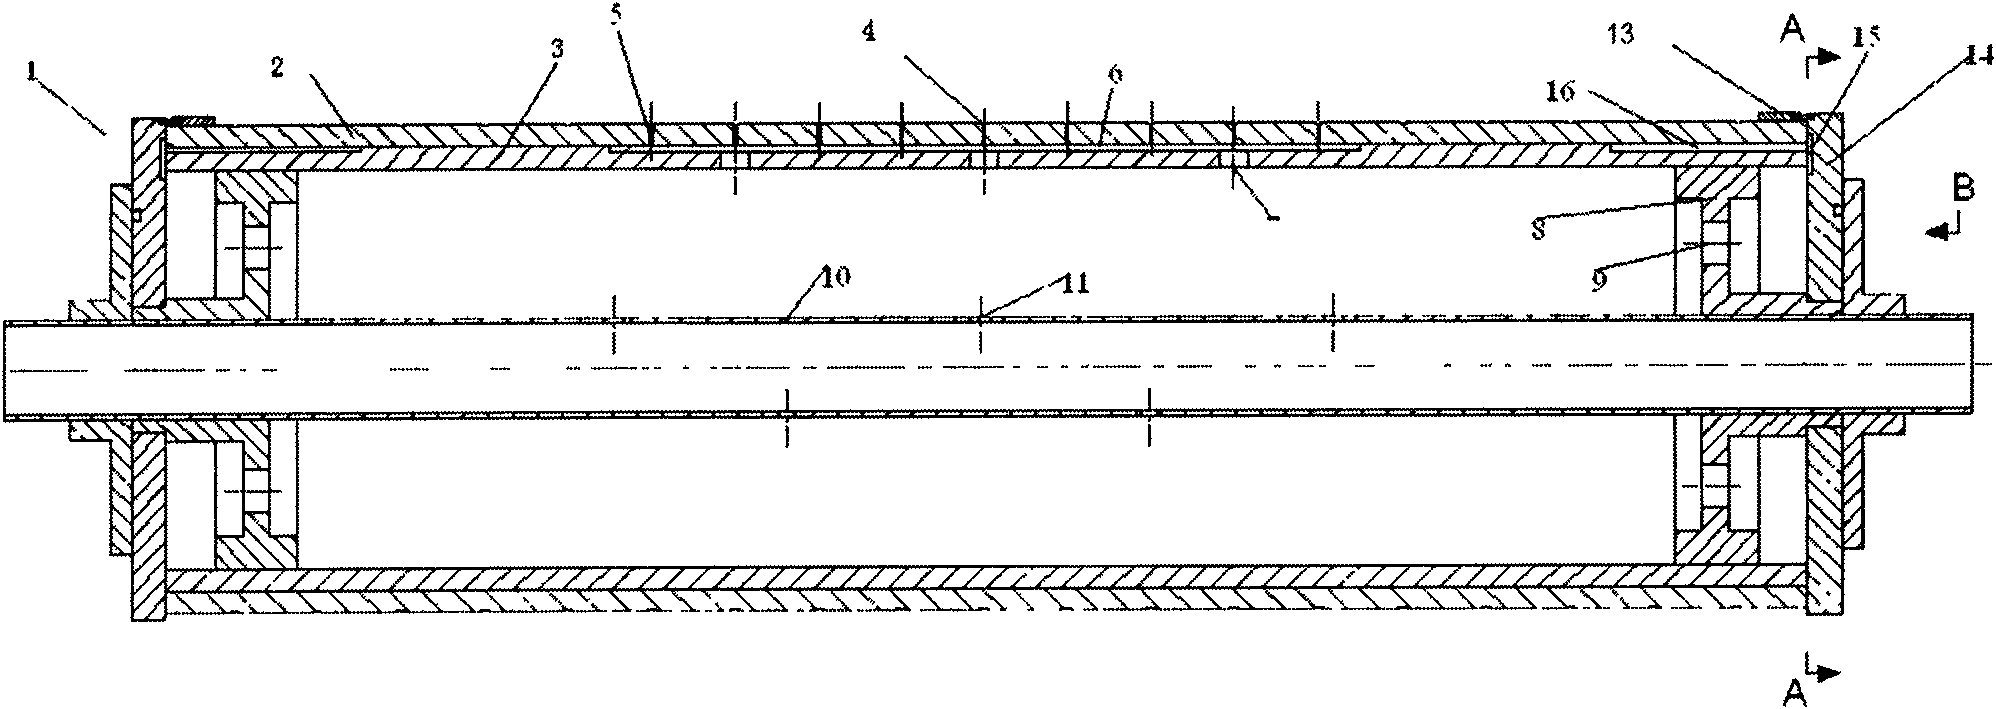 Automatic balancing mechanism for platemaking roller